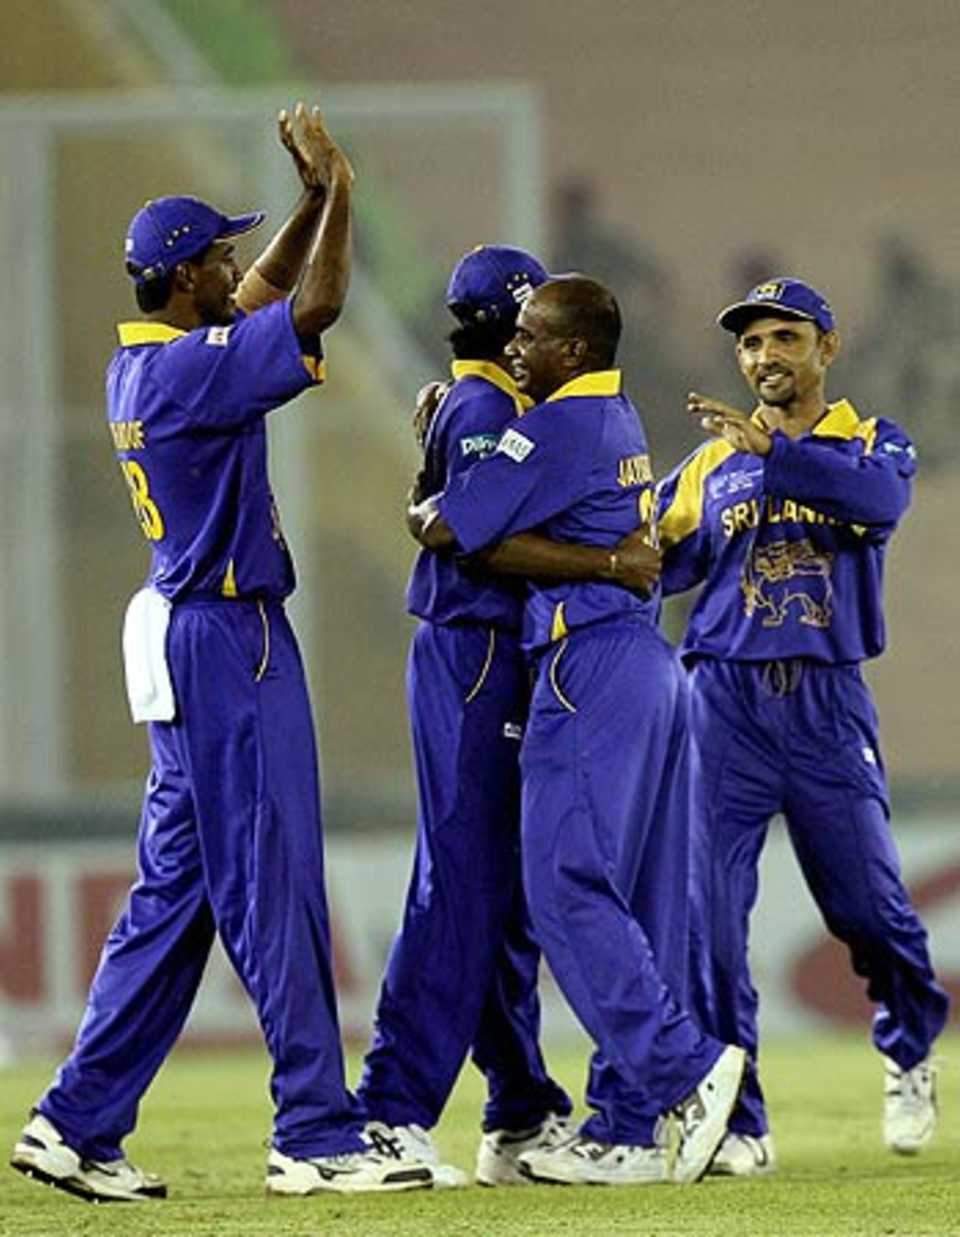 Sanath Jayasuriya is the centre of attention after scalping Mohammad Rafique